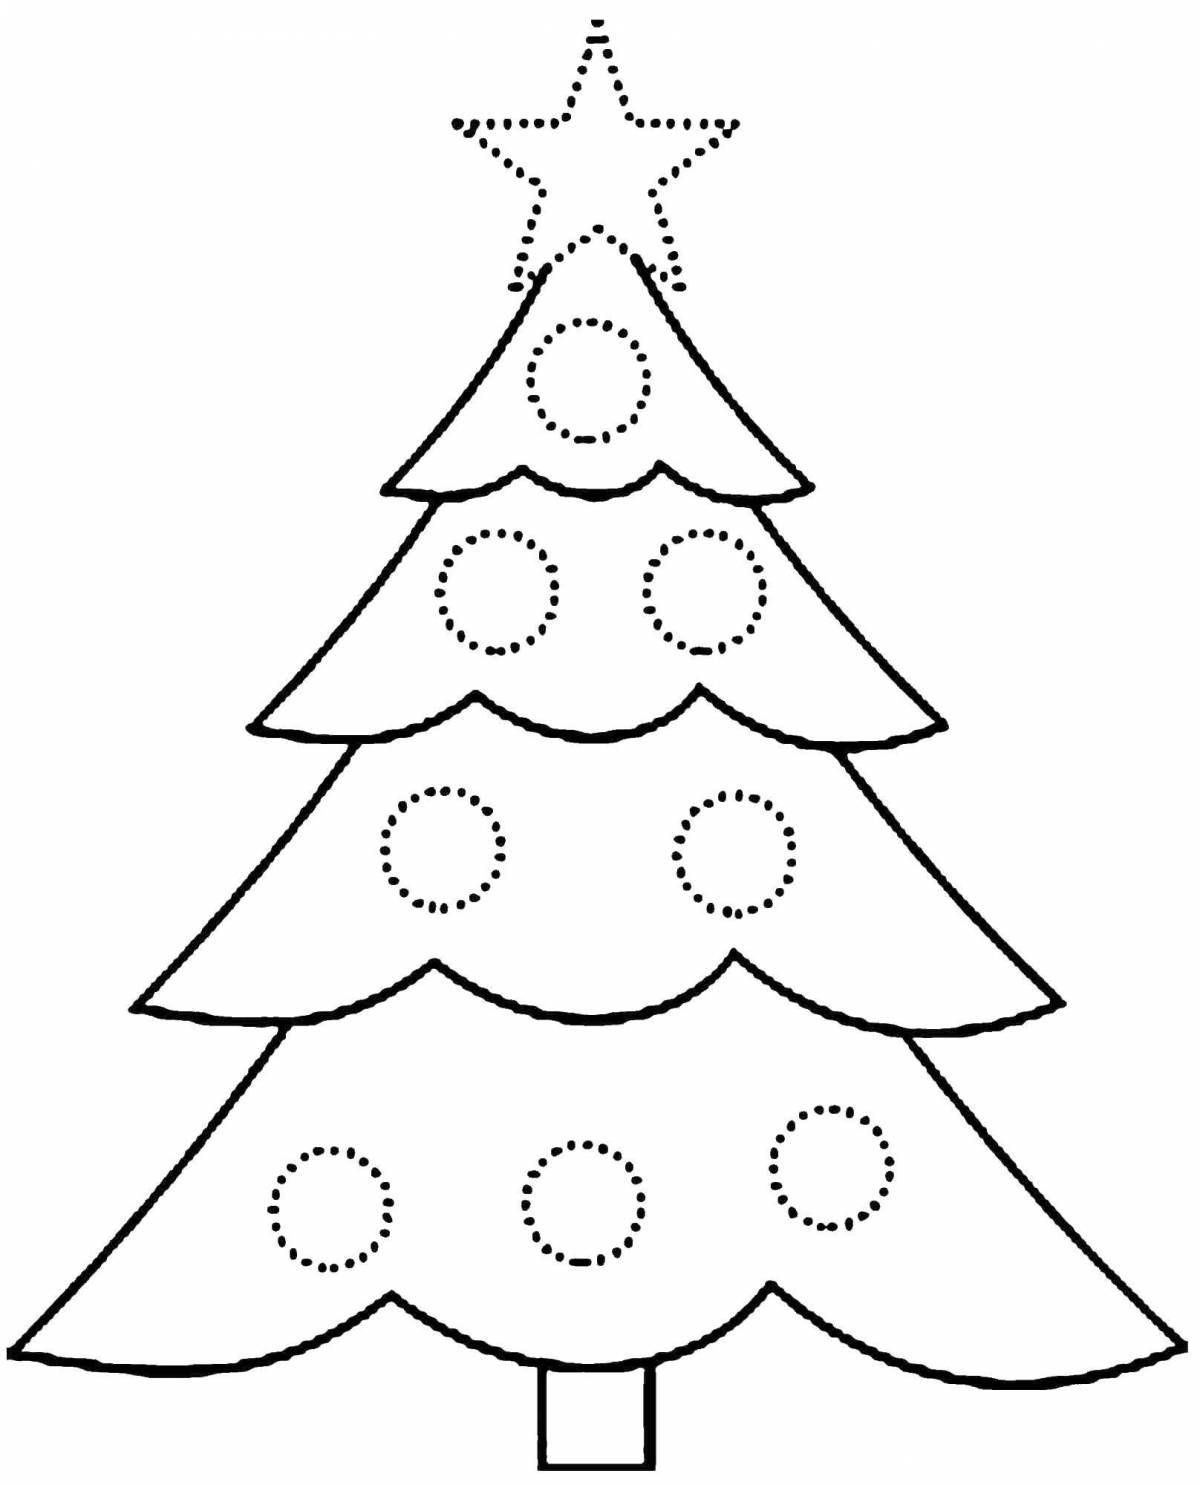 Christmas tree coloring page for children 3-4 years old